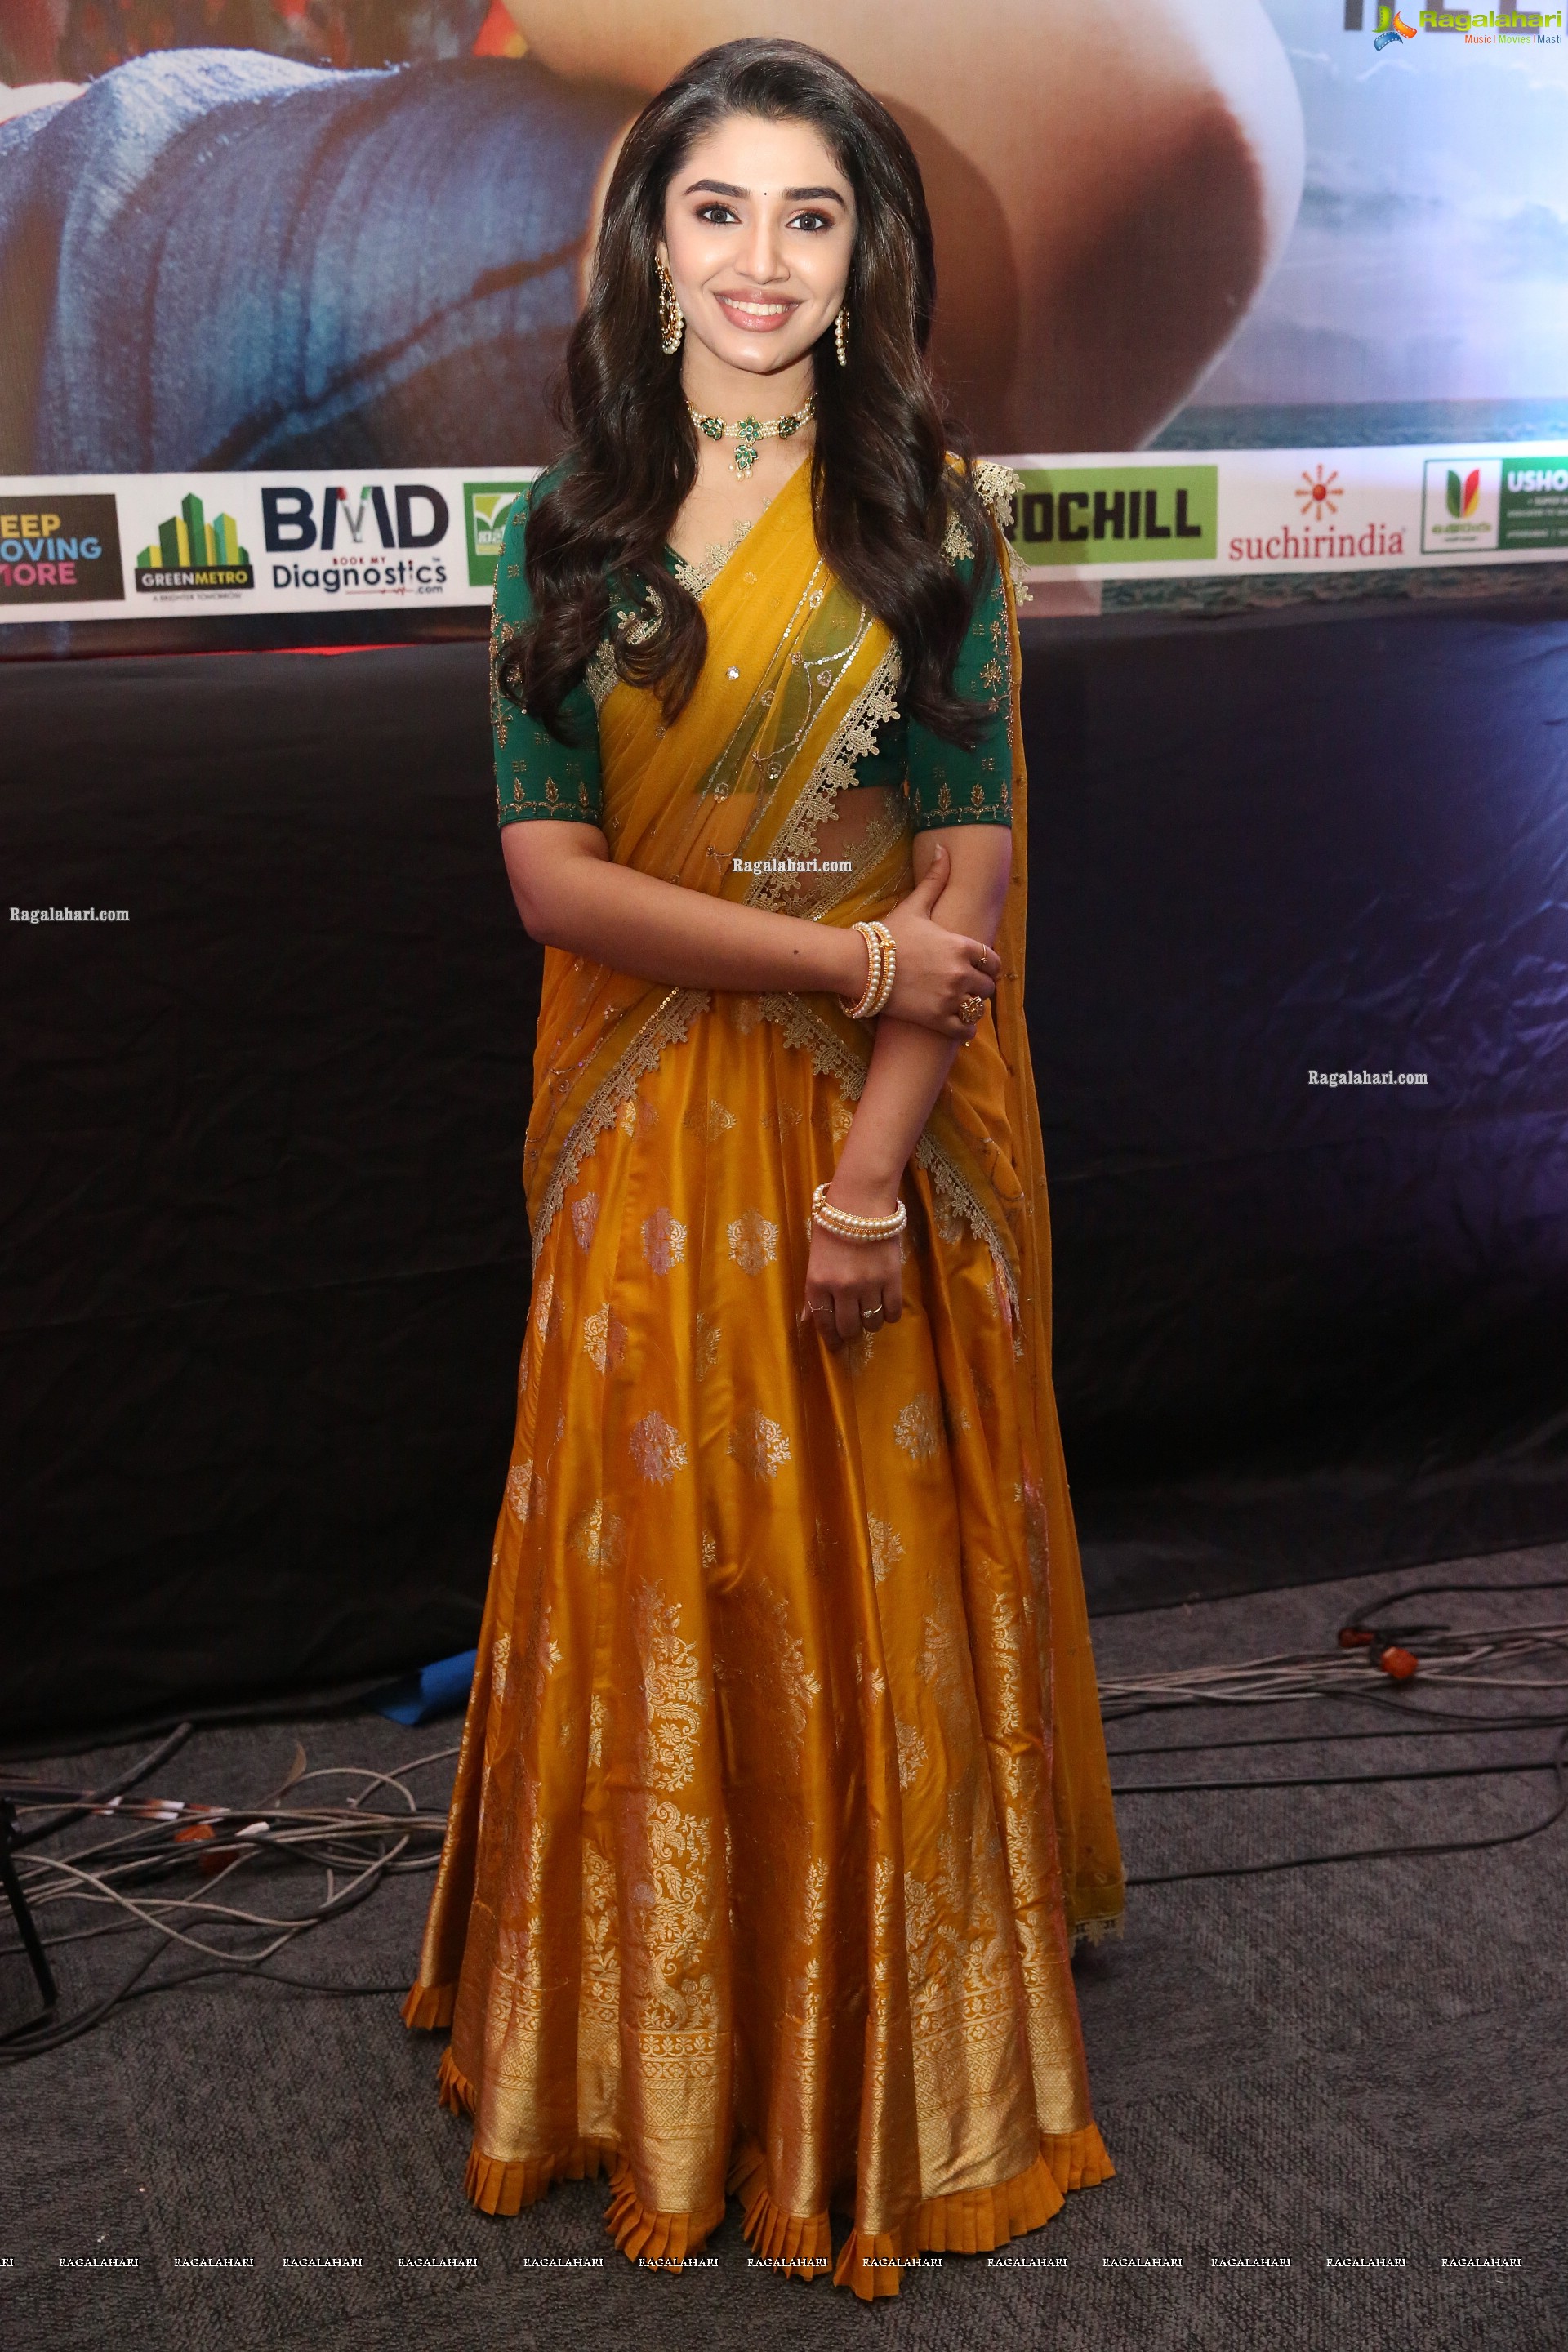 Krithi Shetty at Uppena Movie Pre-Release Event, HD Photo Gallery